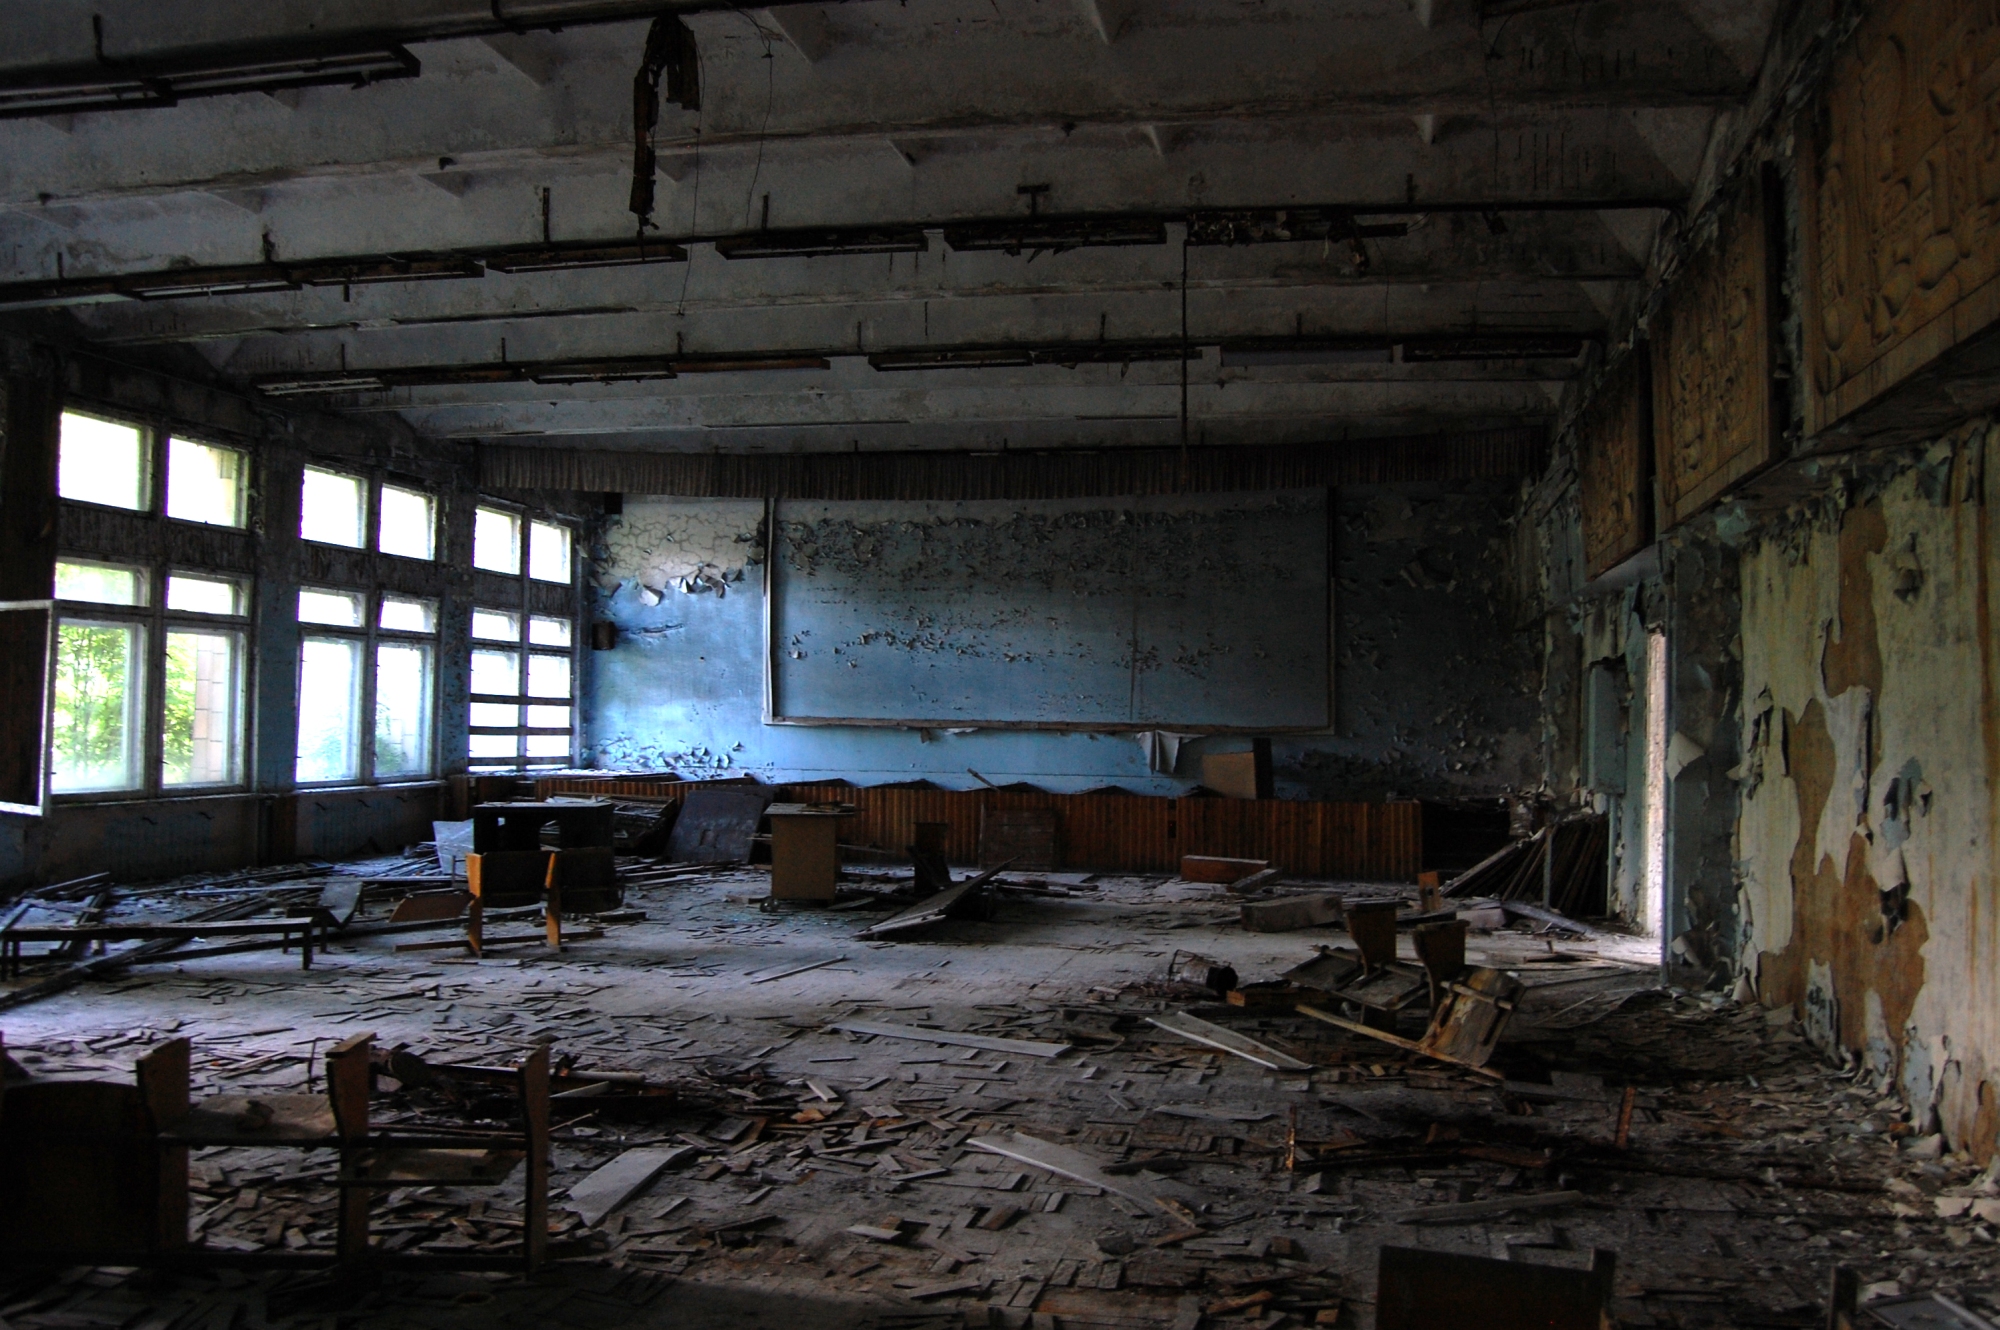 An abandoned school you'll see when visiting Chernobyl.